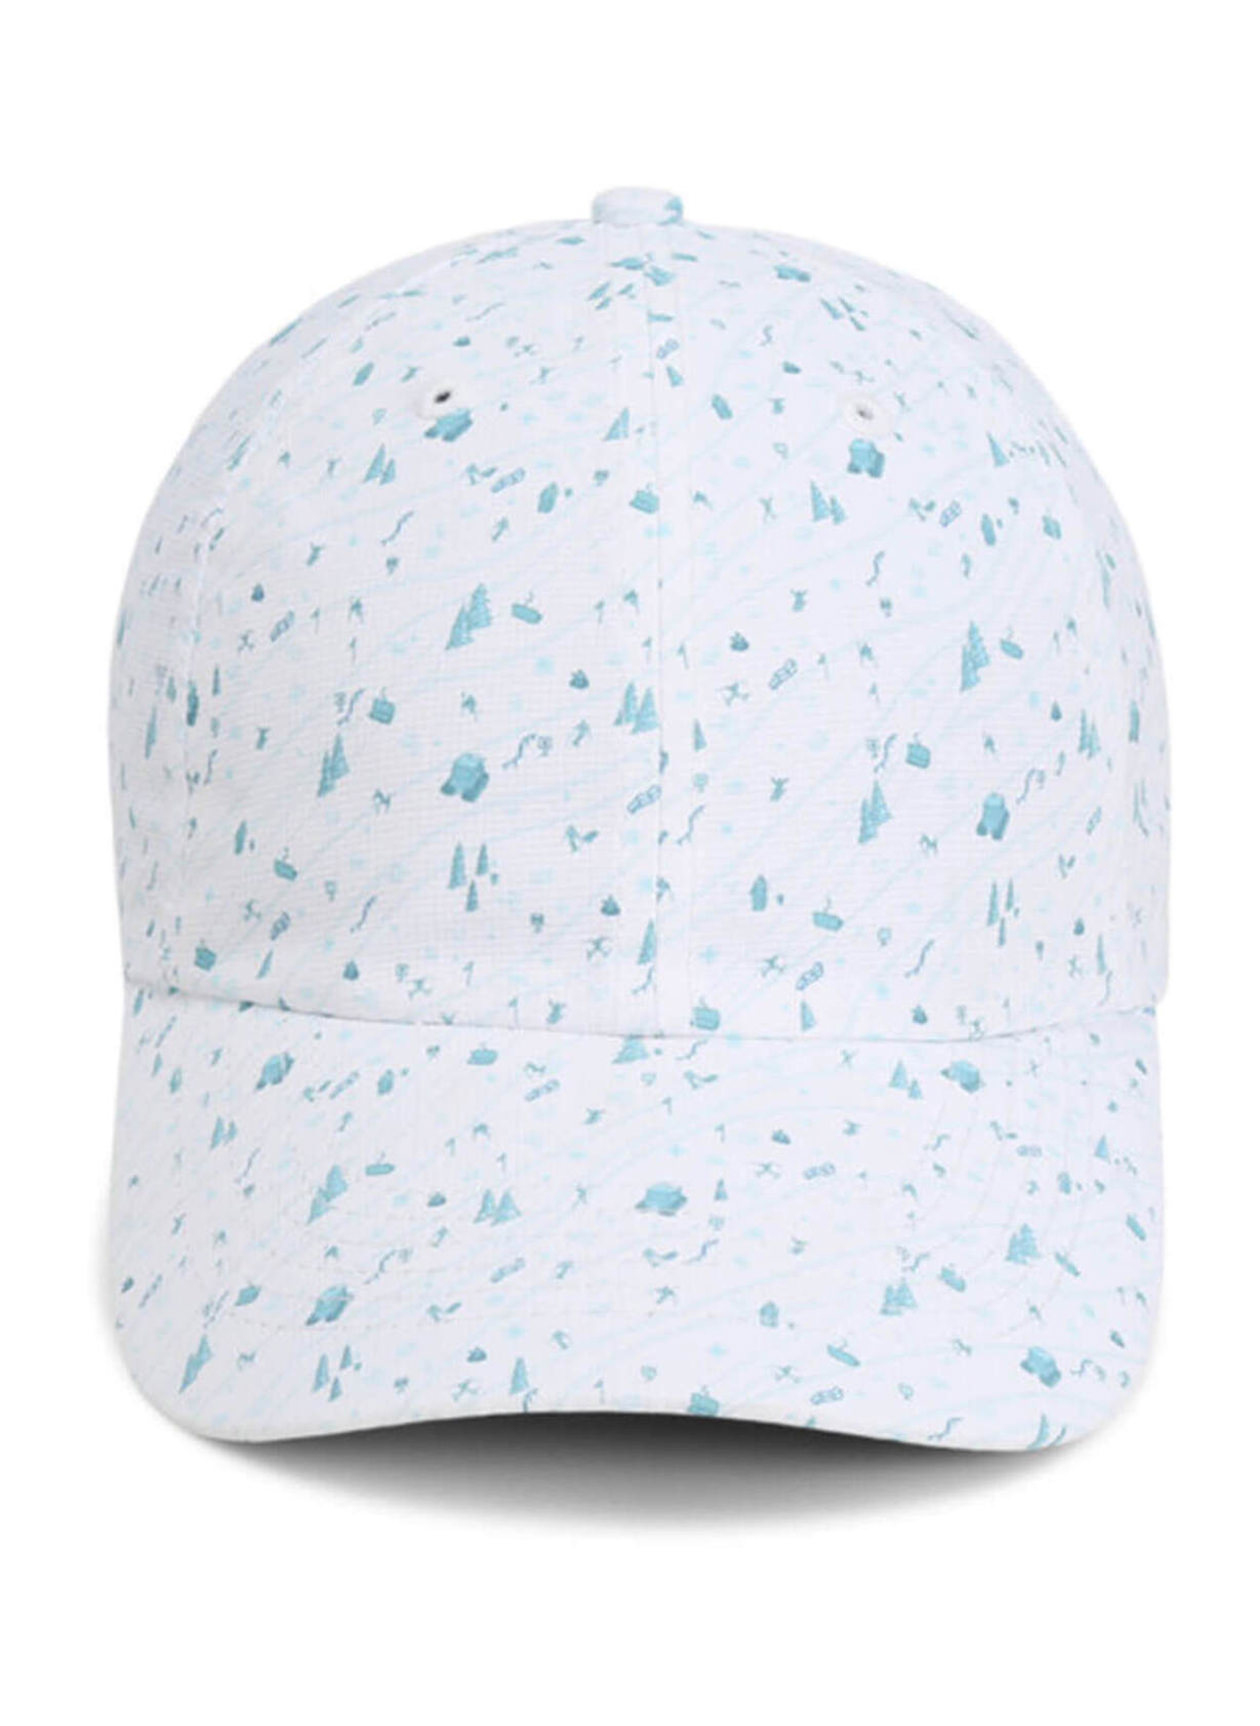 Imperial White / Winter Blue The Alter Ego Pattered Performance Hat